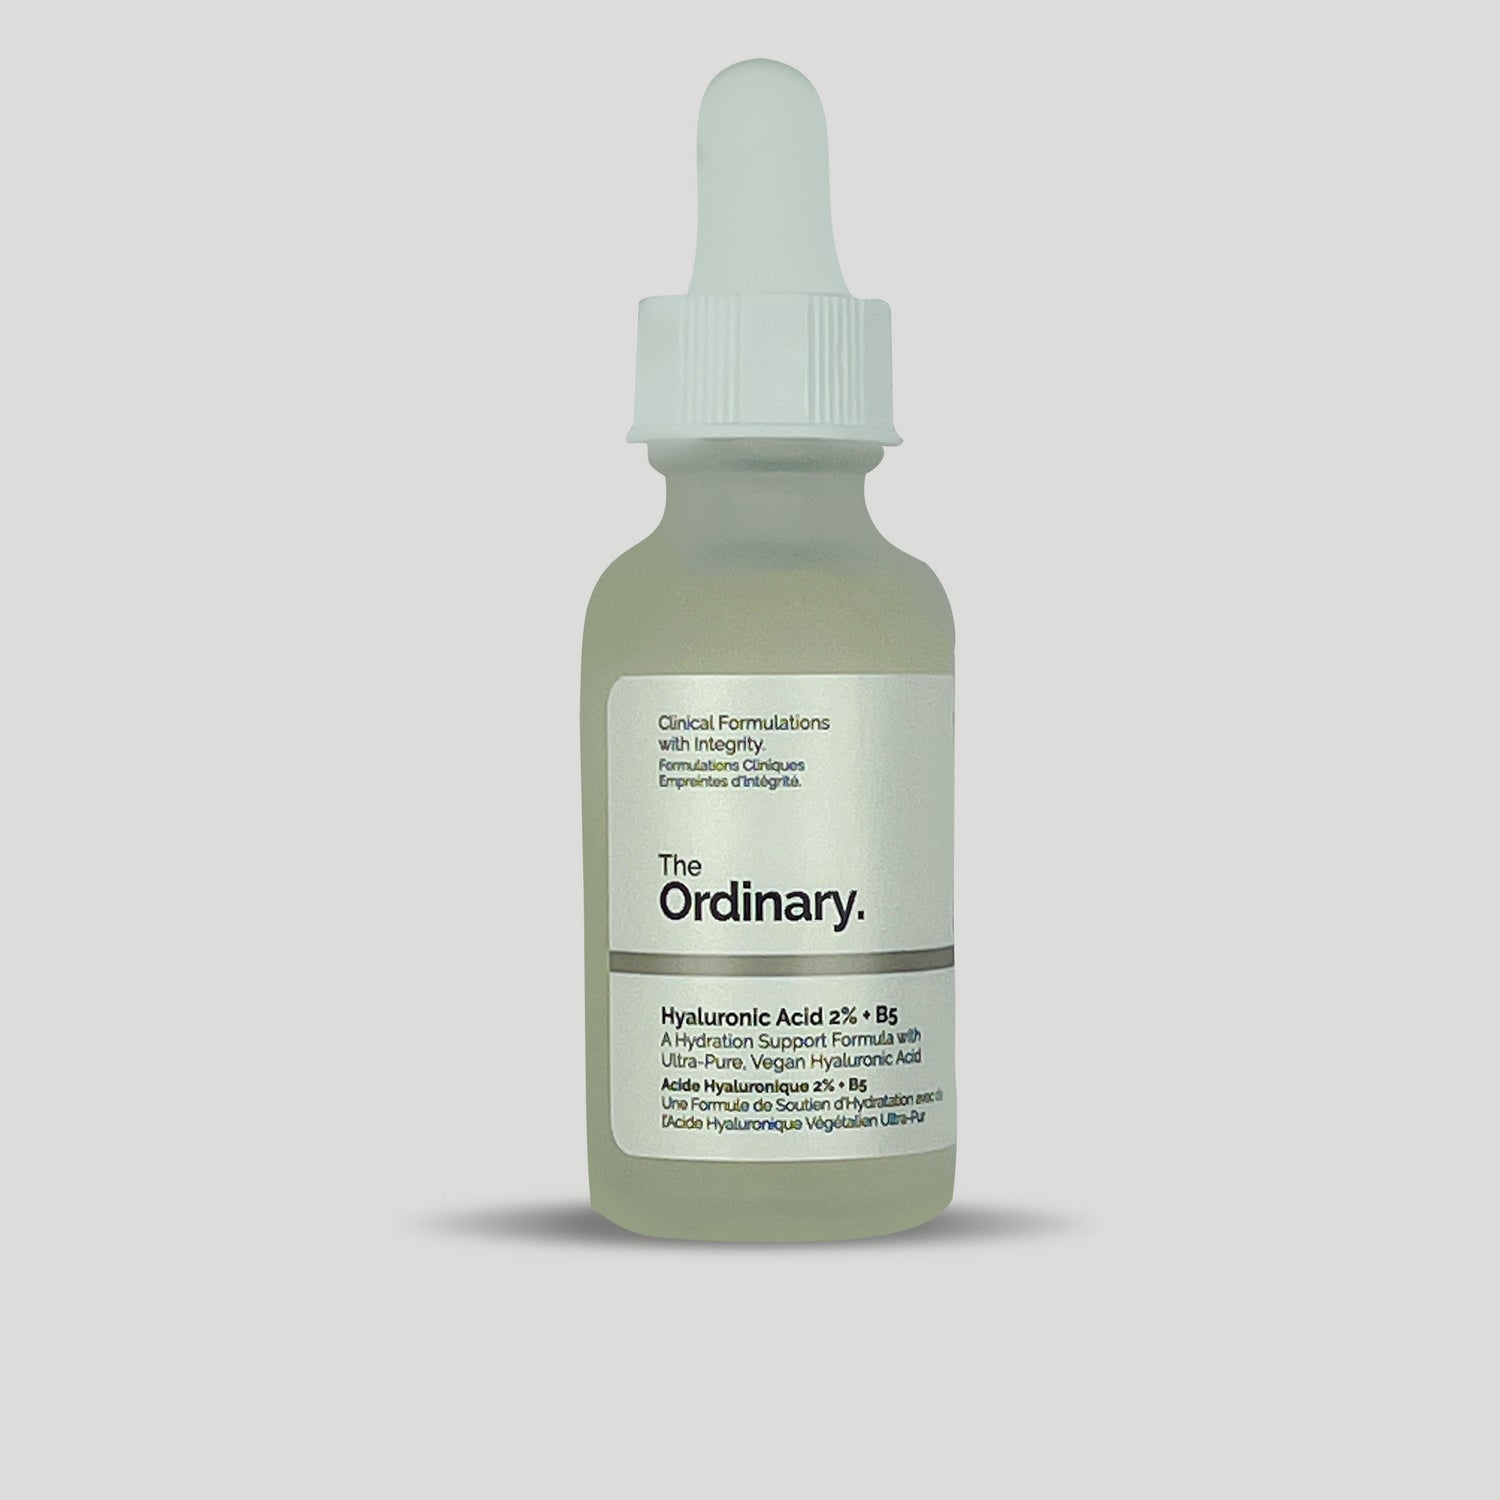 The Ordinary Hyaluronic Acid 2%